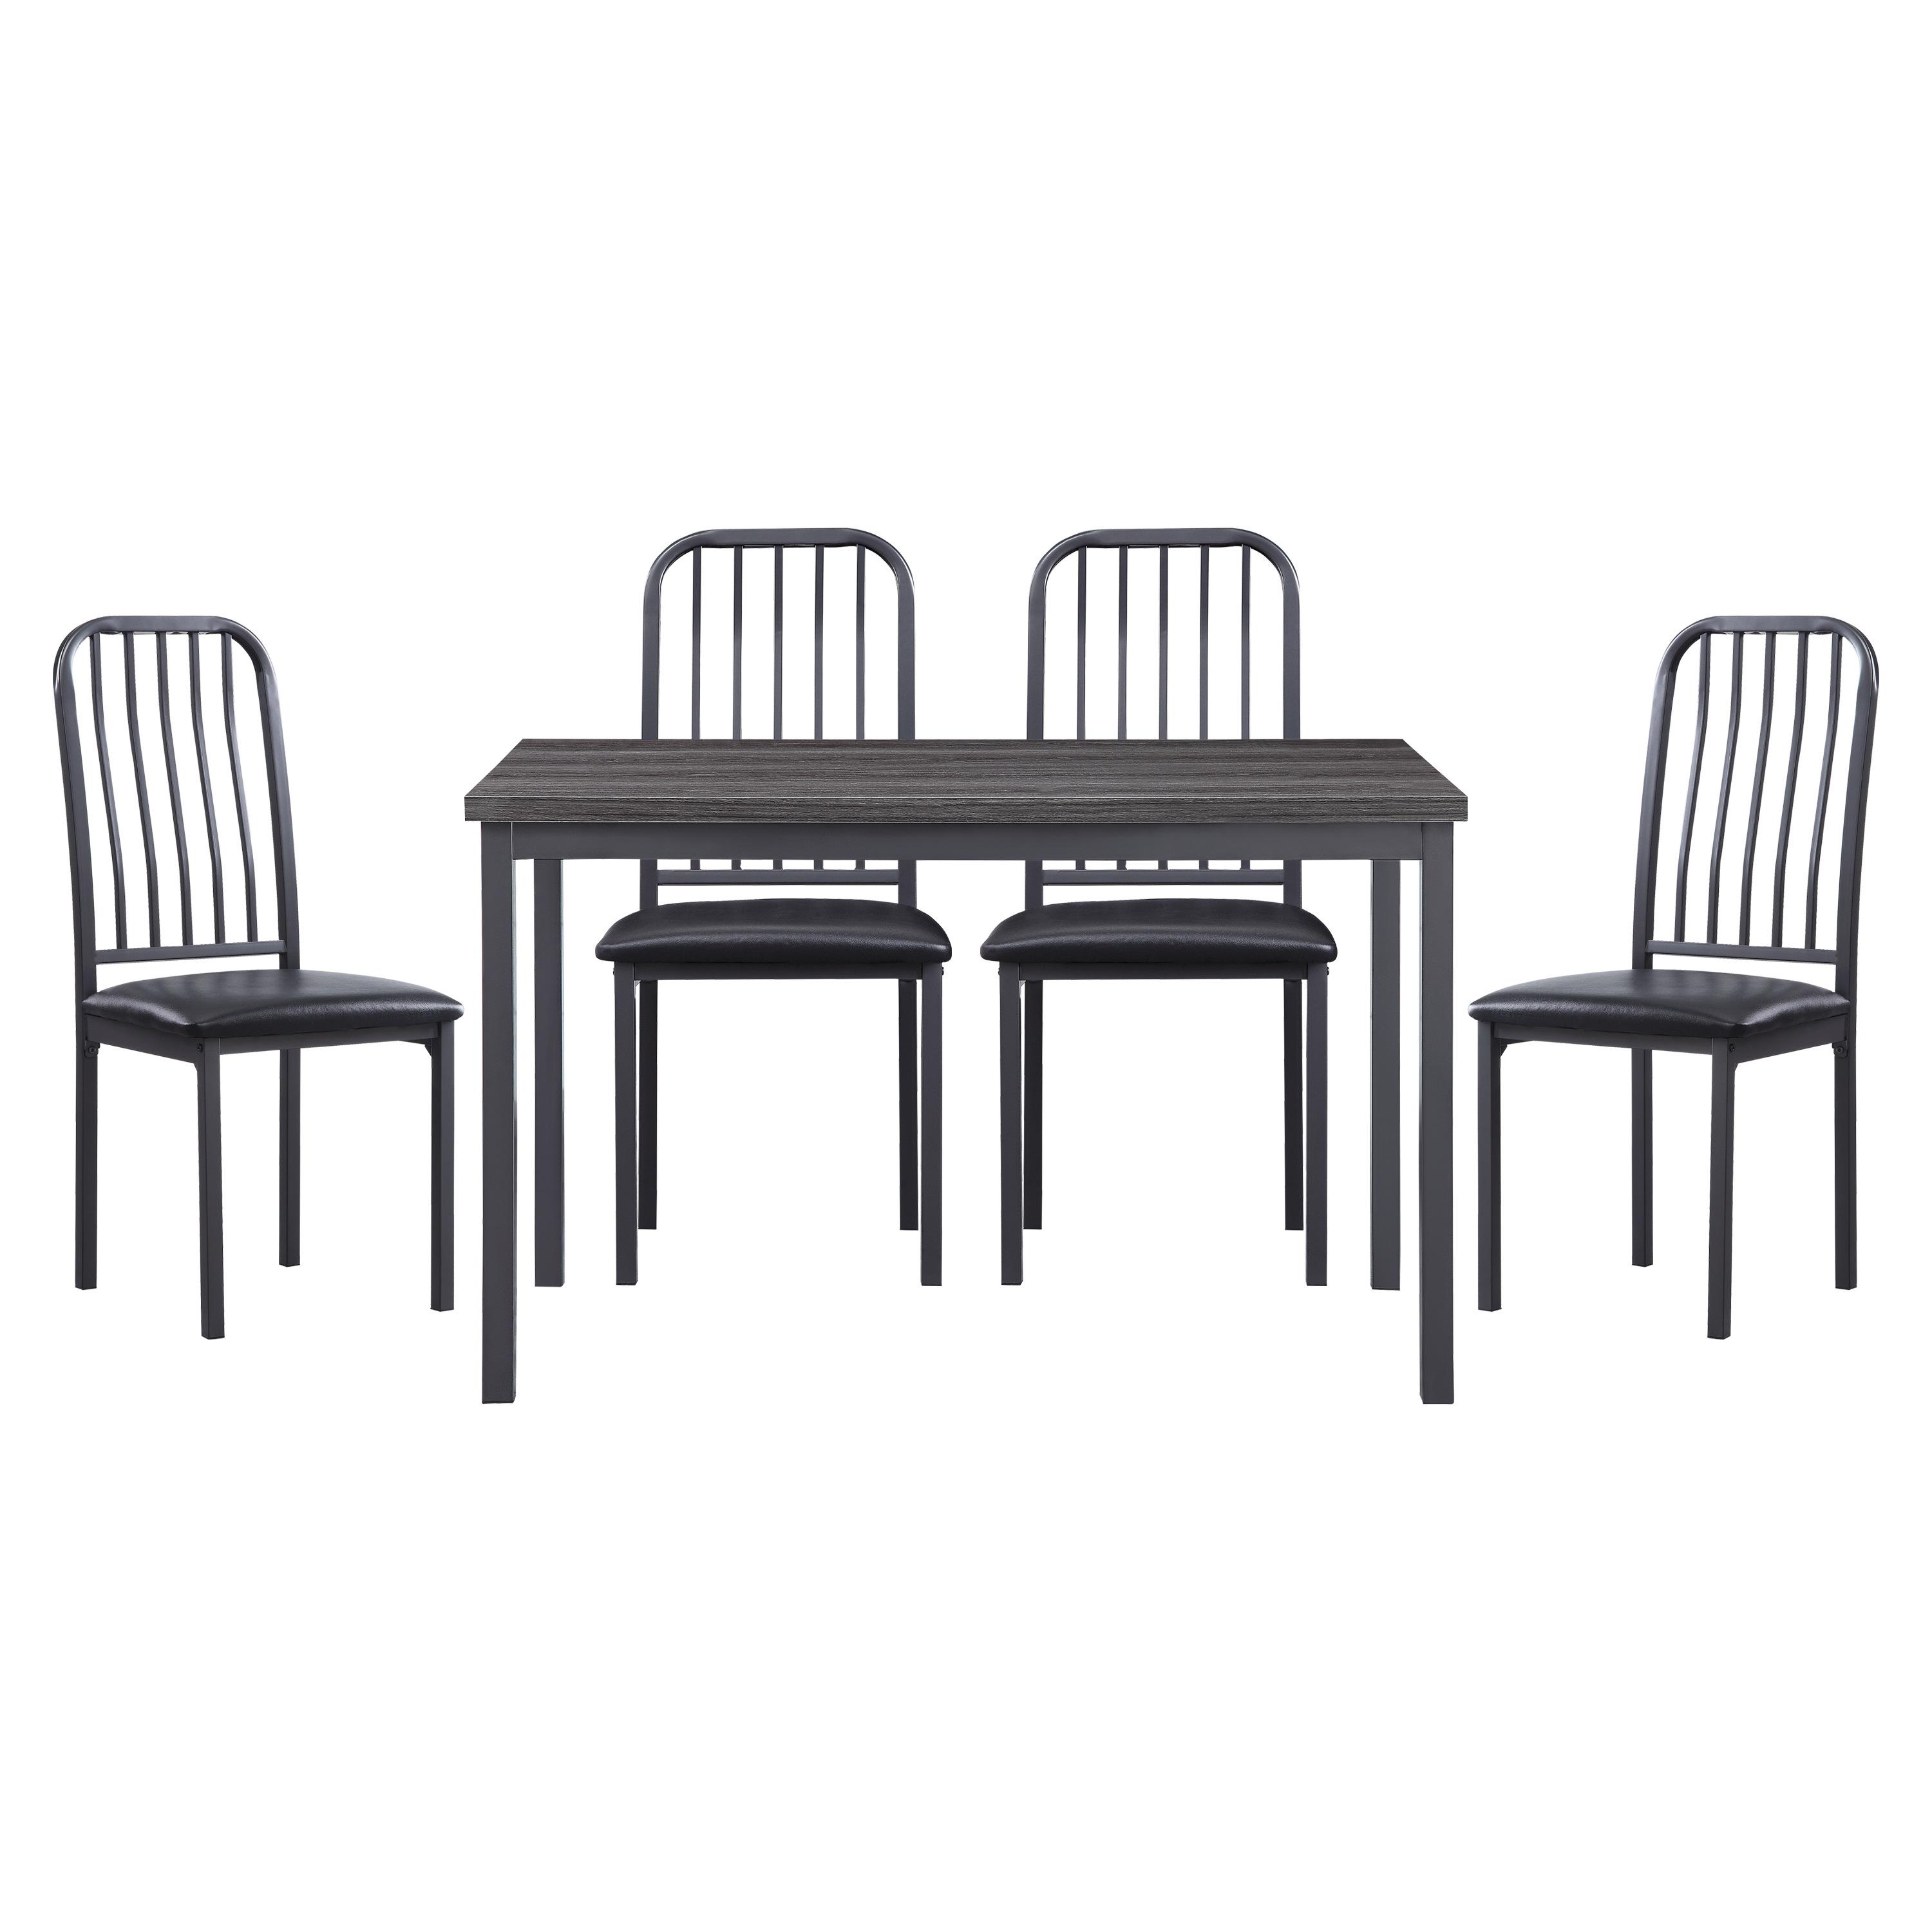 Modern Dining Room Set 5664-48*5PC Tripp 5664-48*5PC in Gray Faux Leather